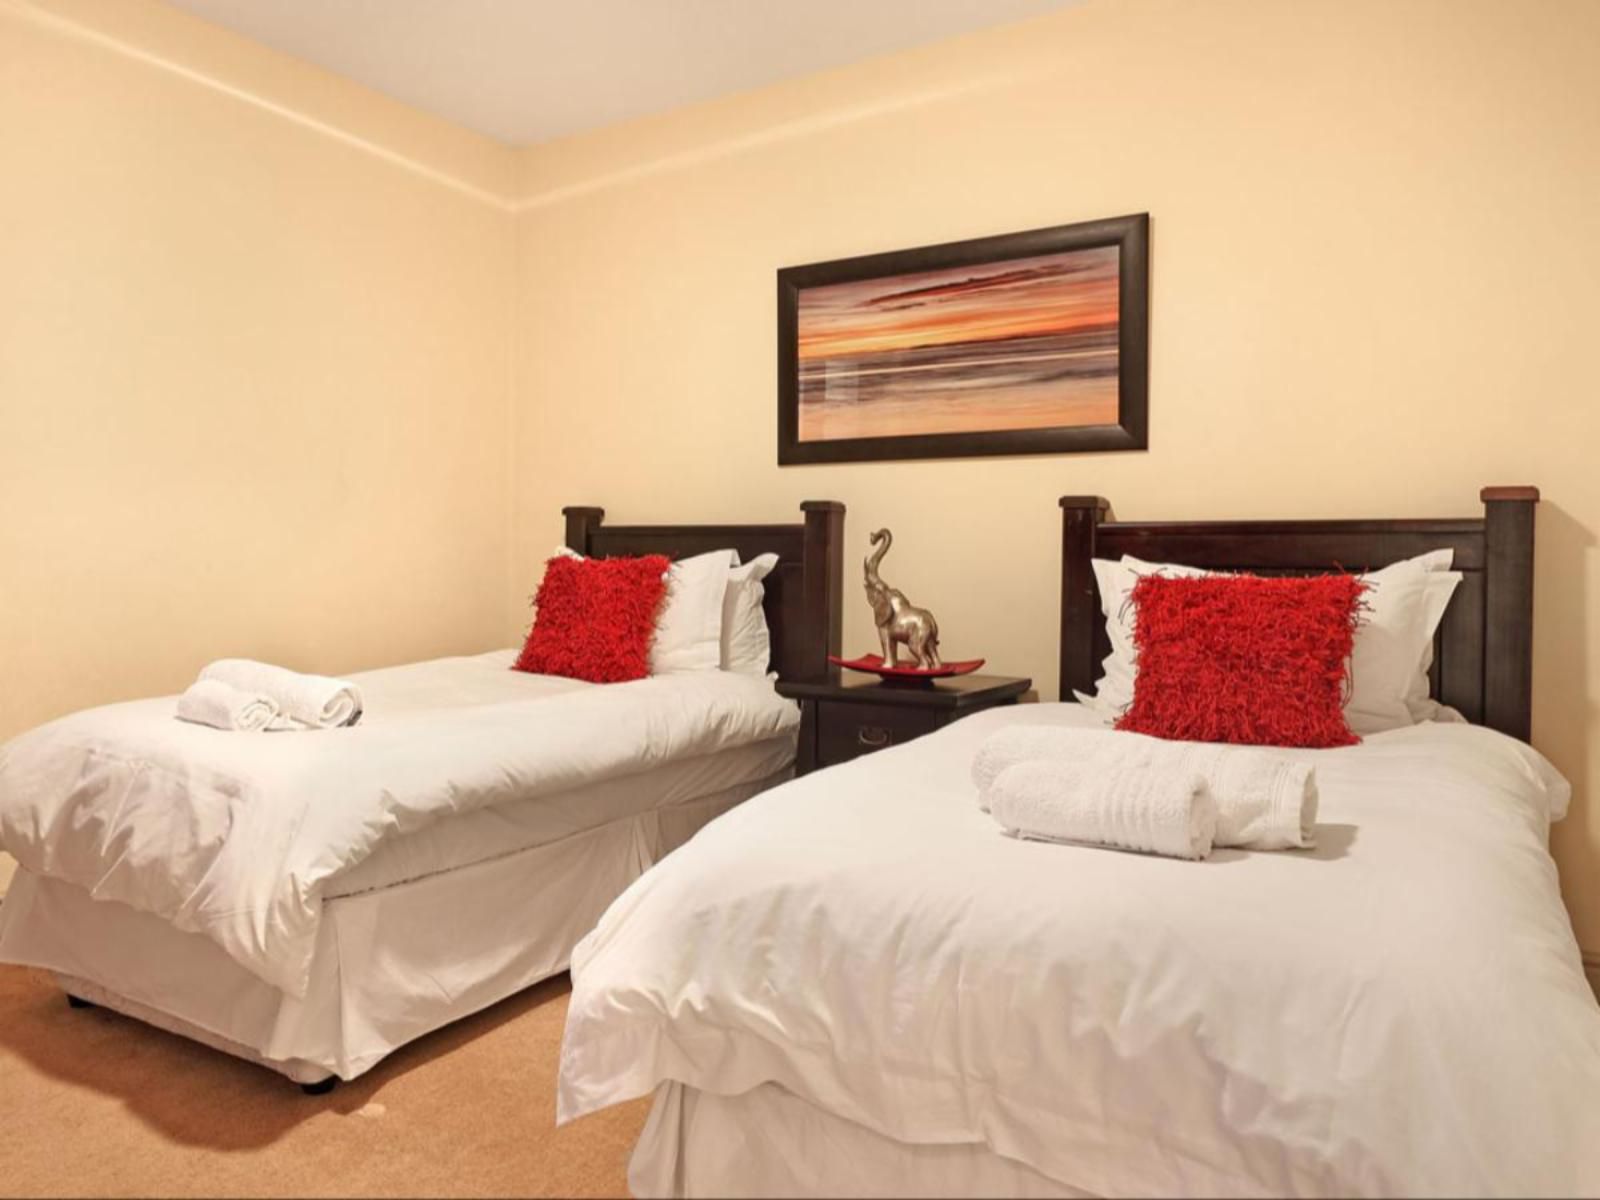 304 Ocean View By Hostagents Van Ryneveld Strand Strand Western Cape South Africa Colorful, Bedroom